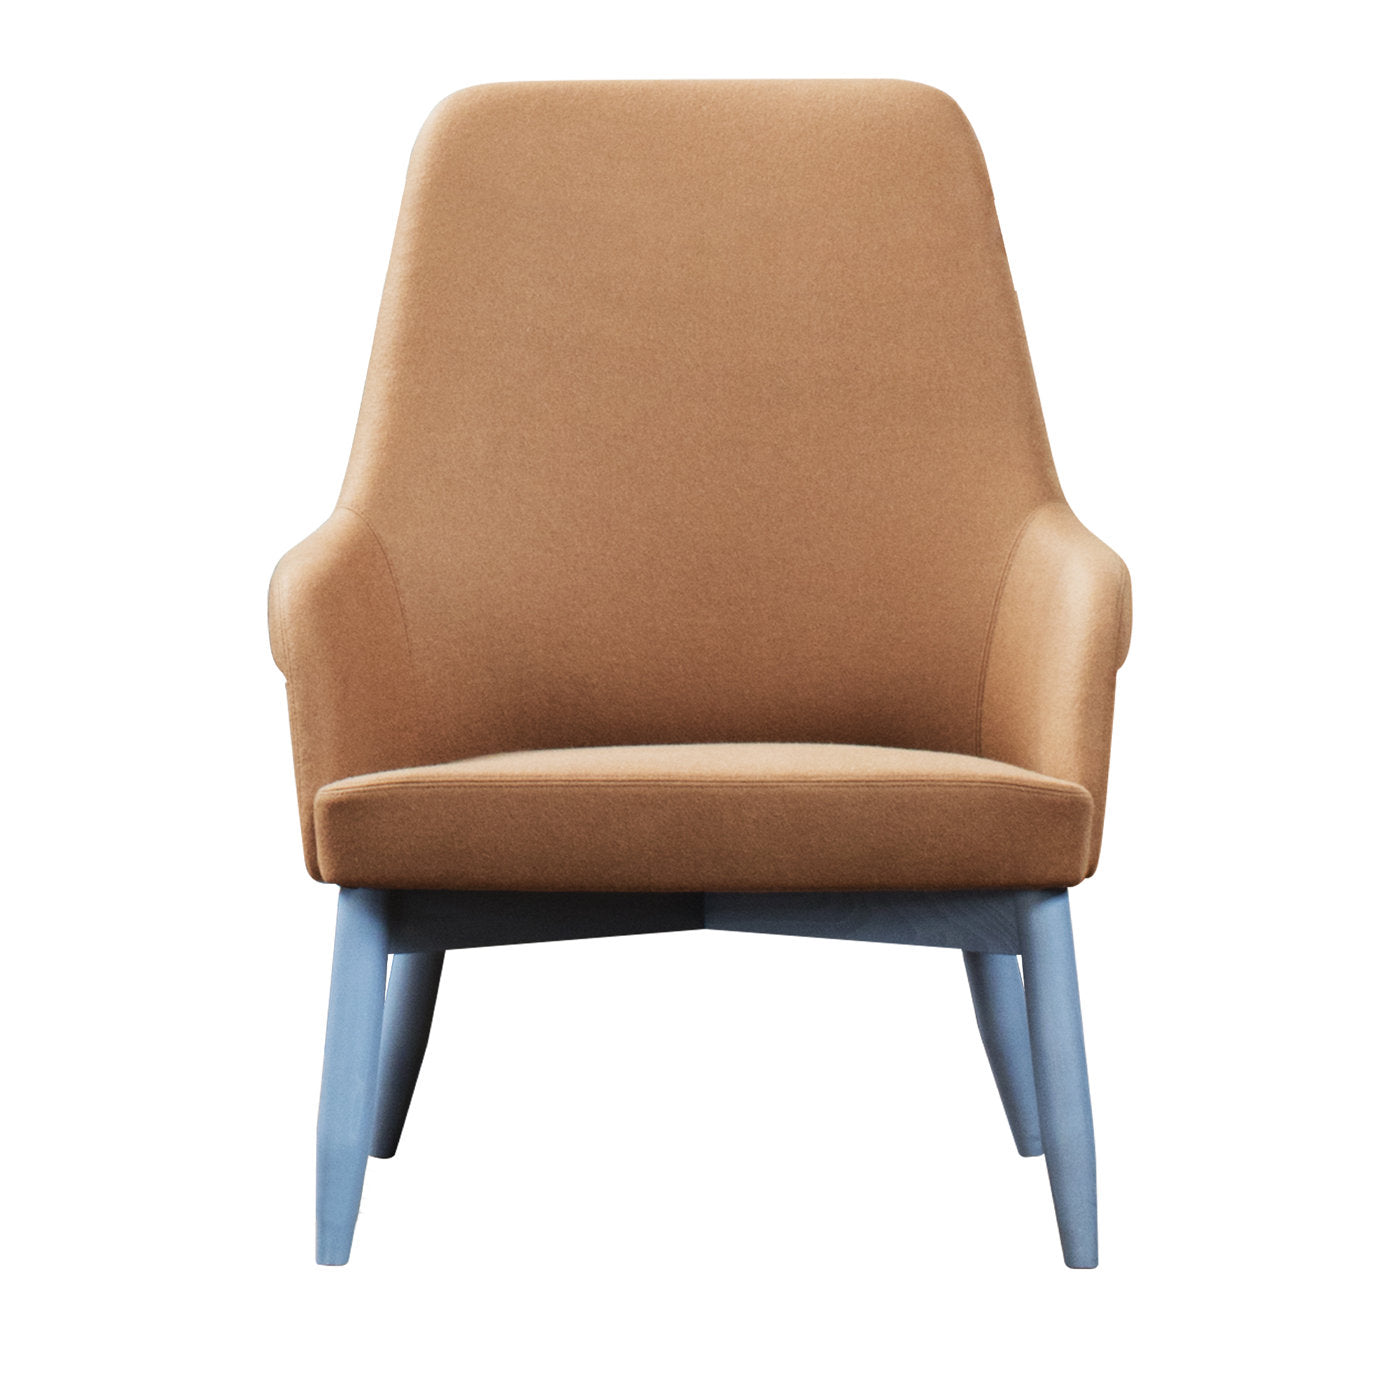 Spy 659 Brown and Blue Armchair by Emilio Nanni - Main view